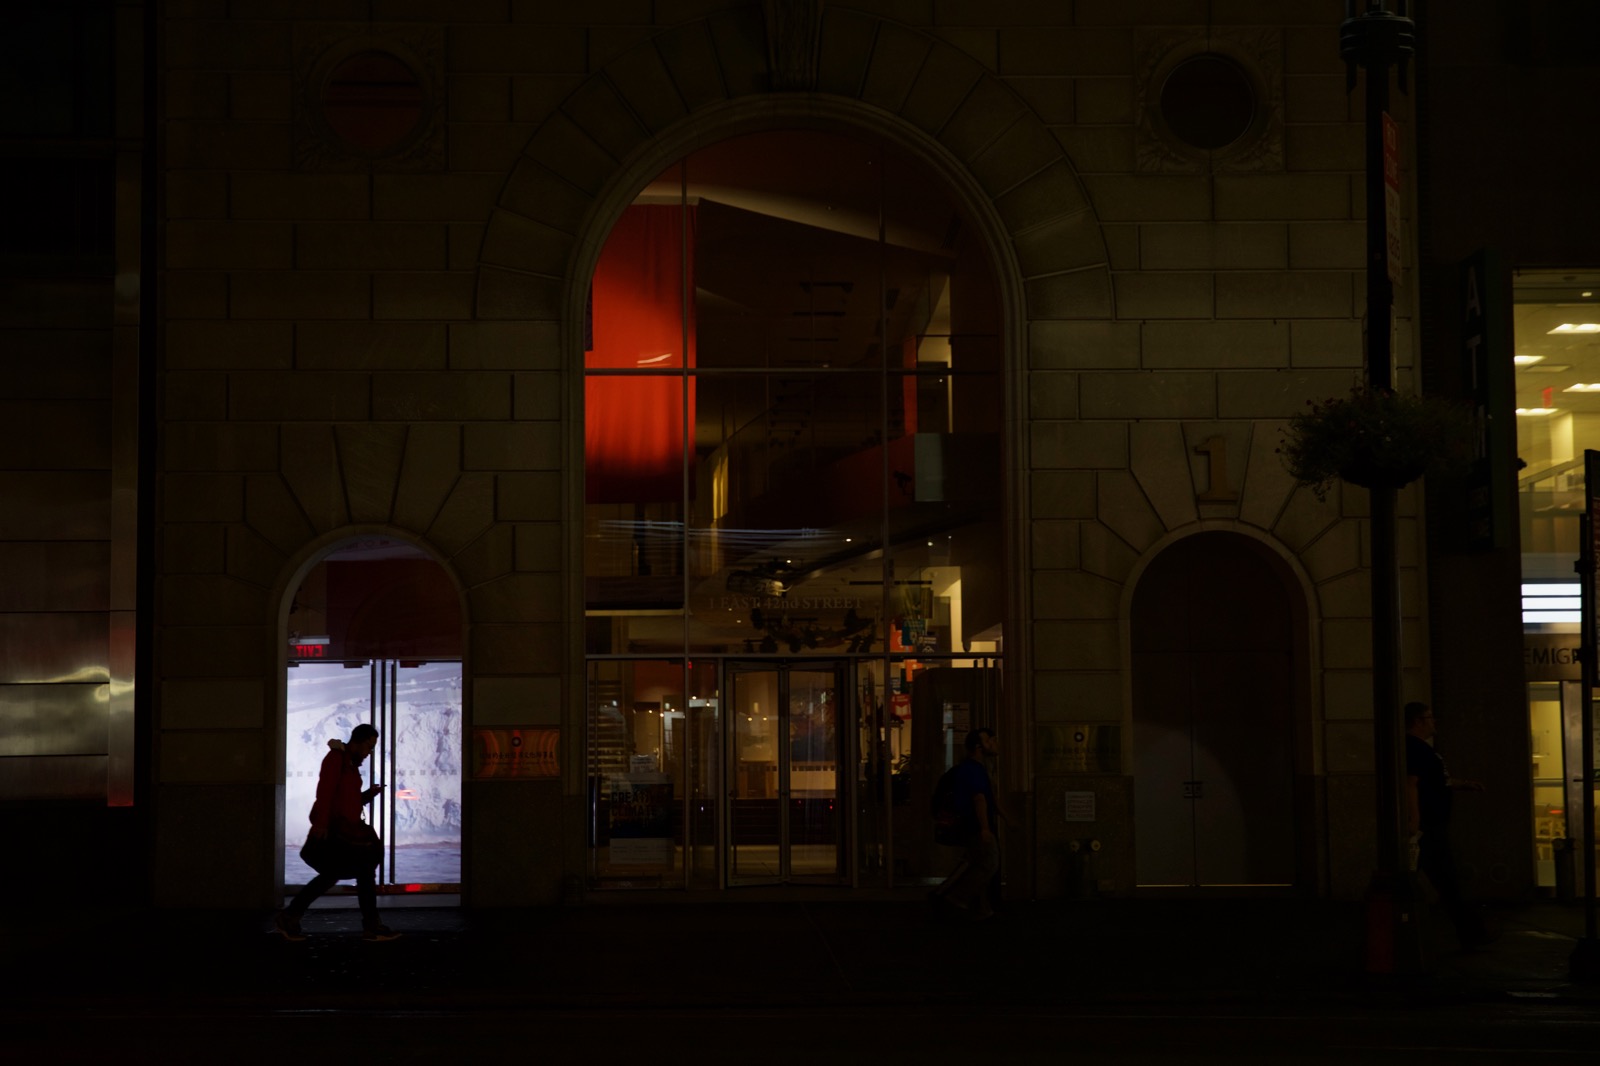 Small thumbnail image of Very dark nighttime photograph of a silhouetted figure walking down the street looking at their phone. Behind him is a projected image of glaciers in a small storefront window.